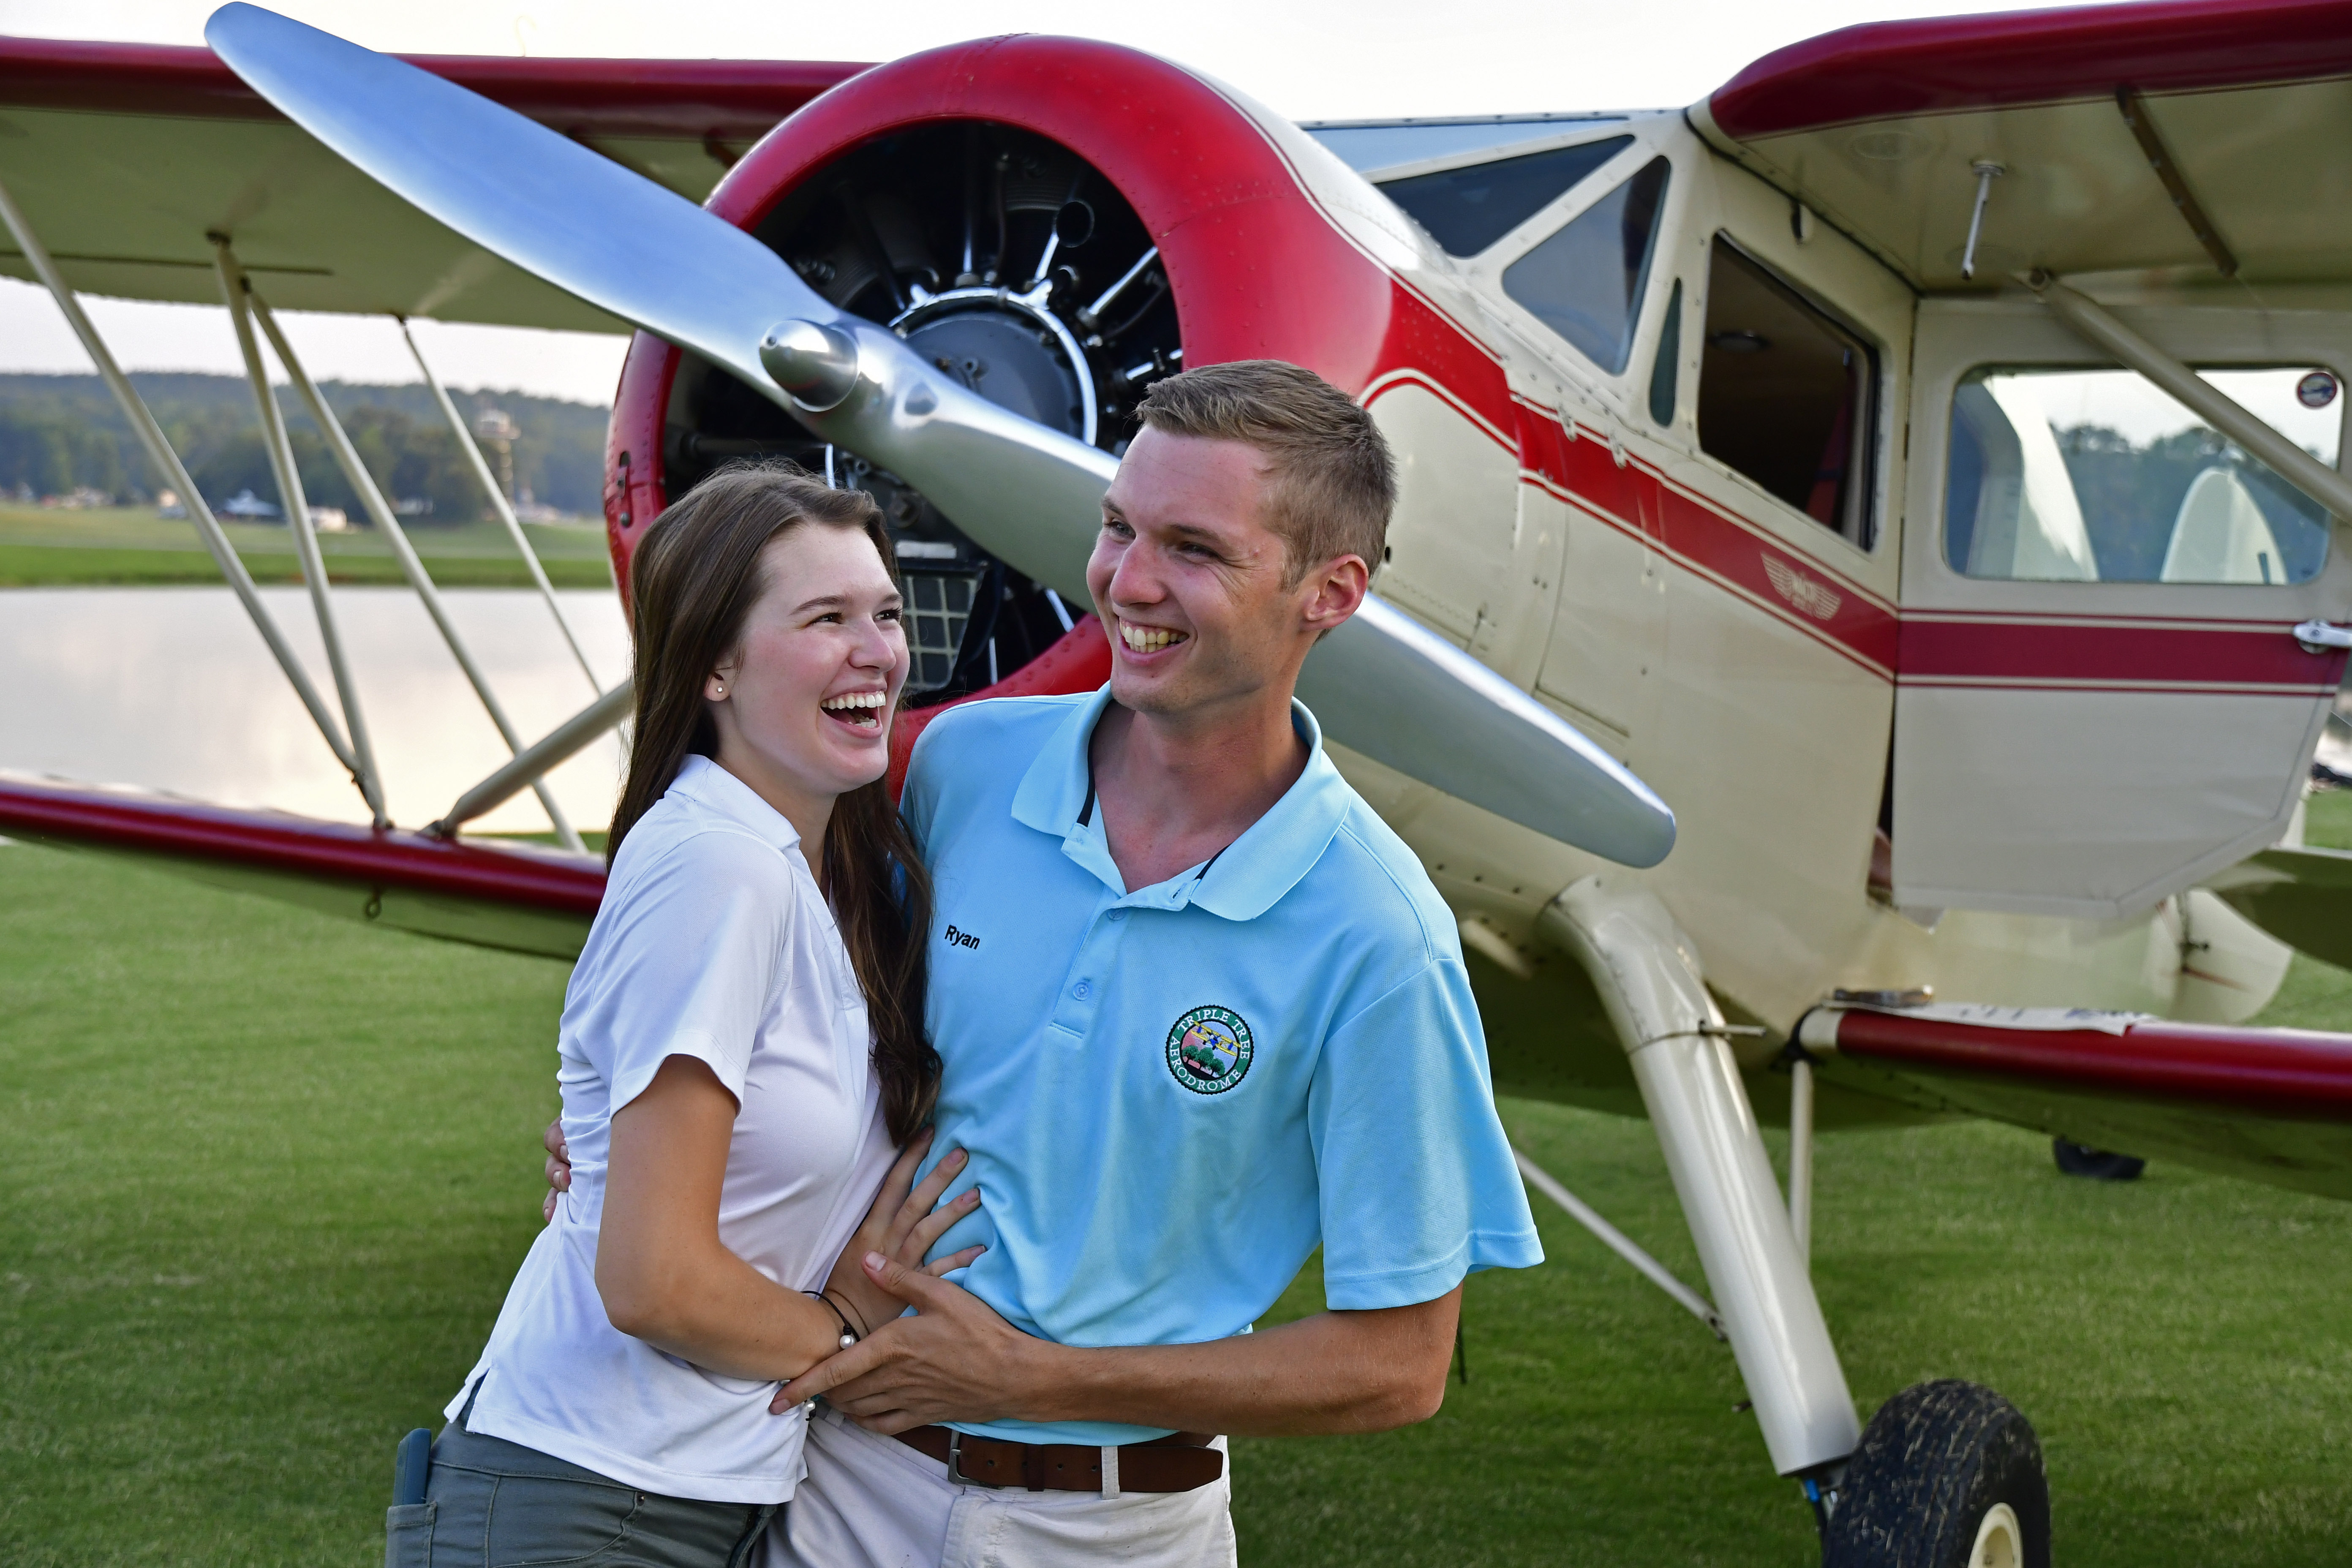 Young Aviators Fly-In organizers Cayla McLeod and Ryan Hunt clown around in front of a cabin Waco YKS-6 biplane at Triple Tree Aerodrome in Woodruff, South Carolina, June 8 to 10. Photo by David Tulis.